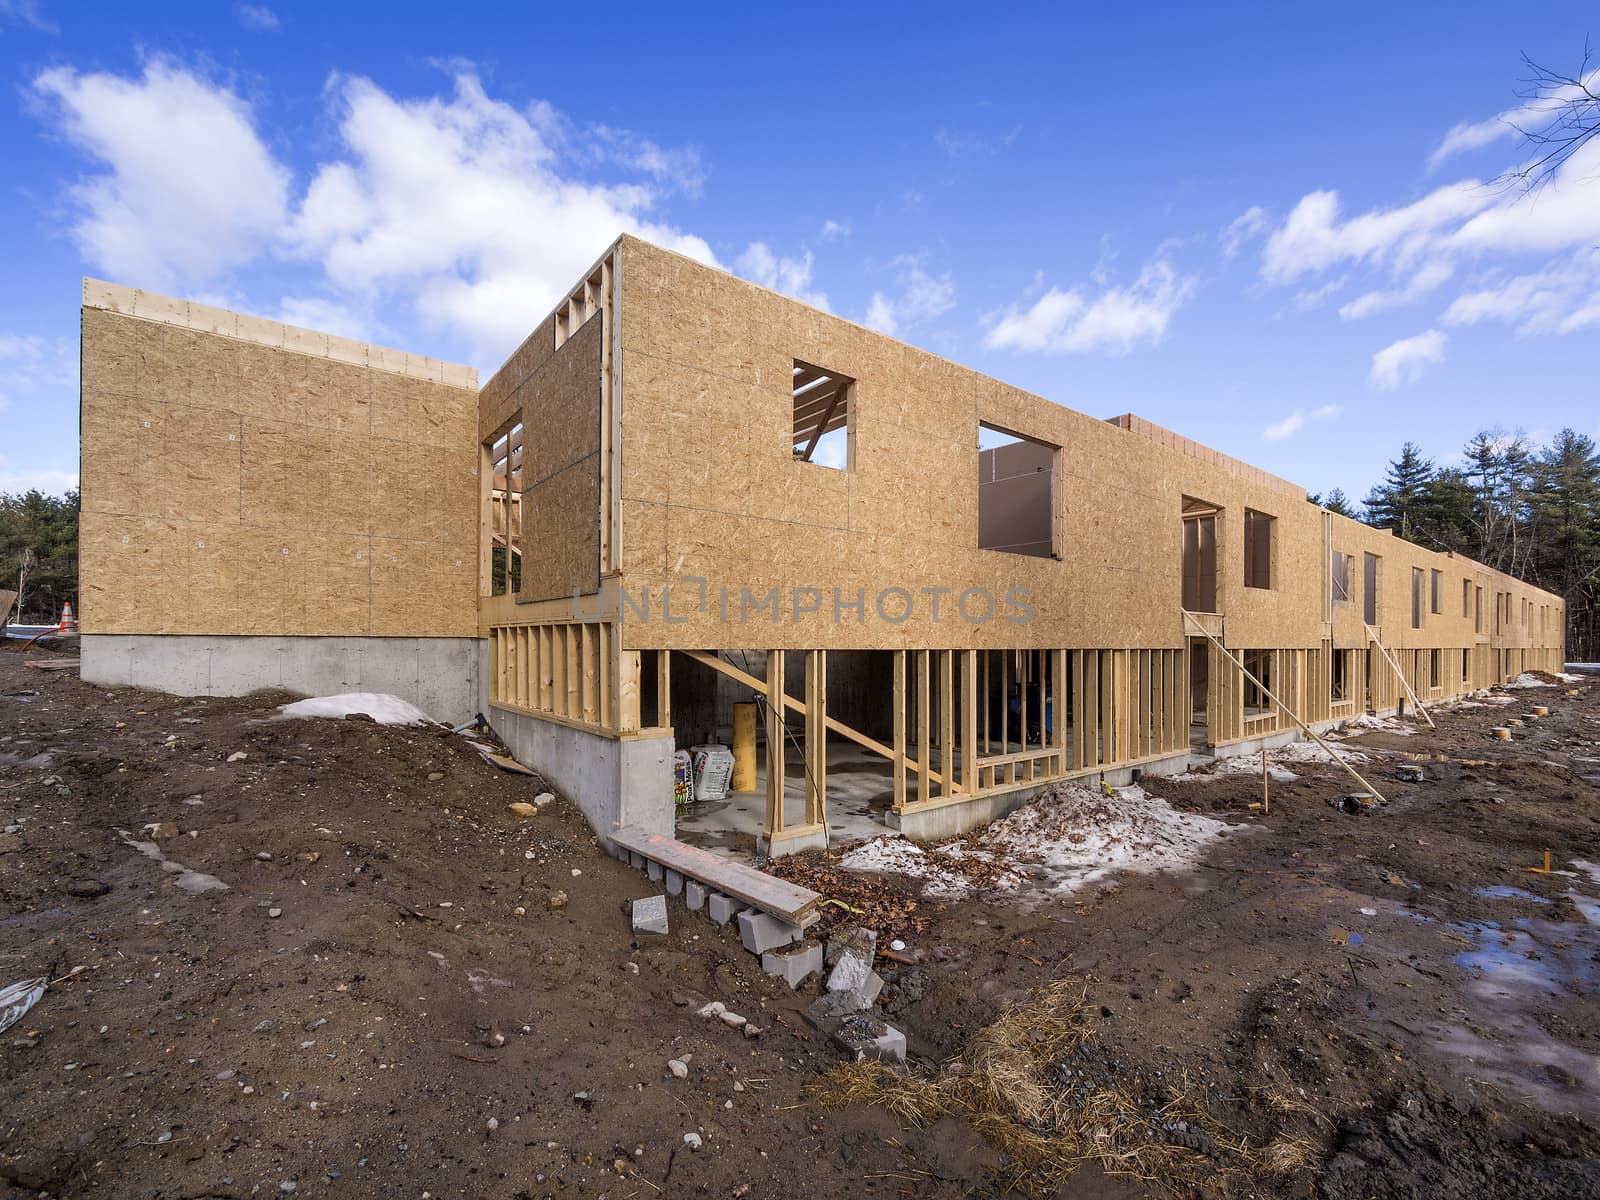 New framing house construction with no roof and two by fours exposed